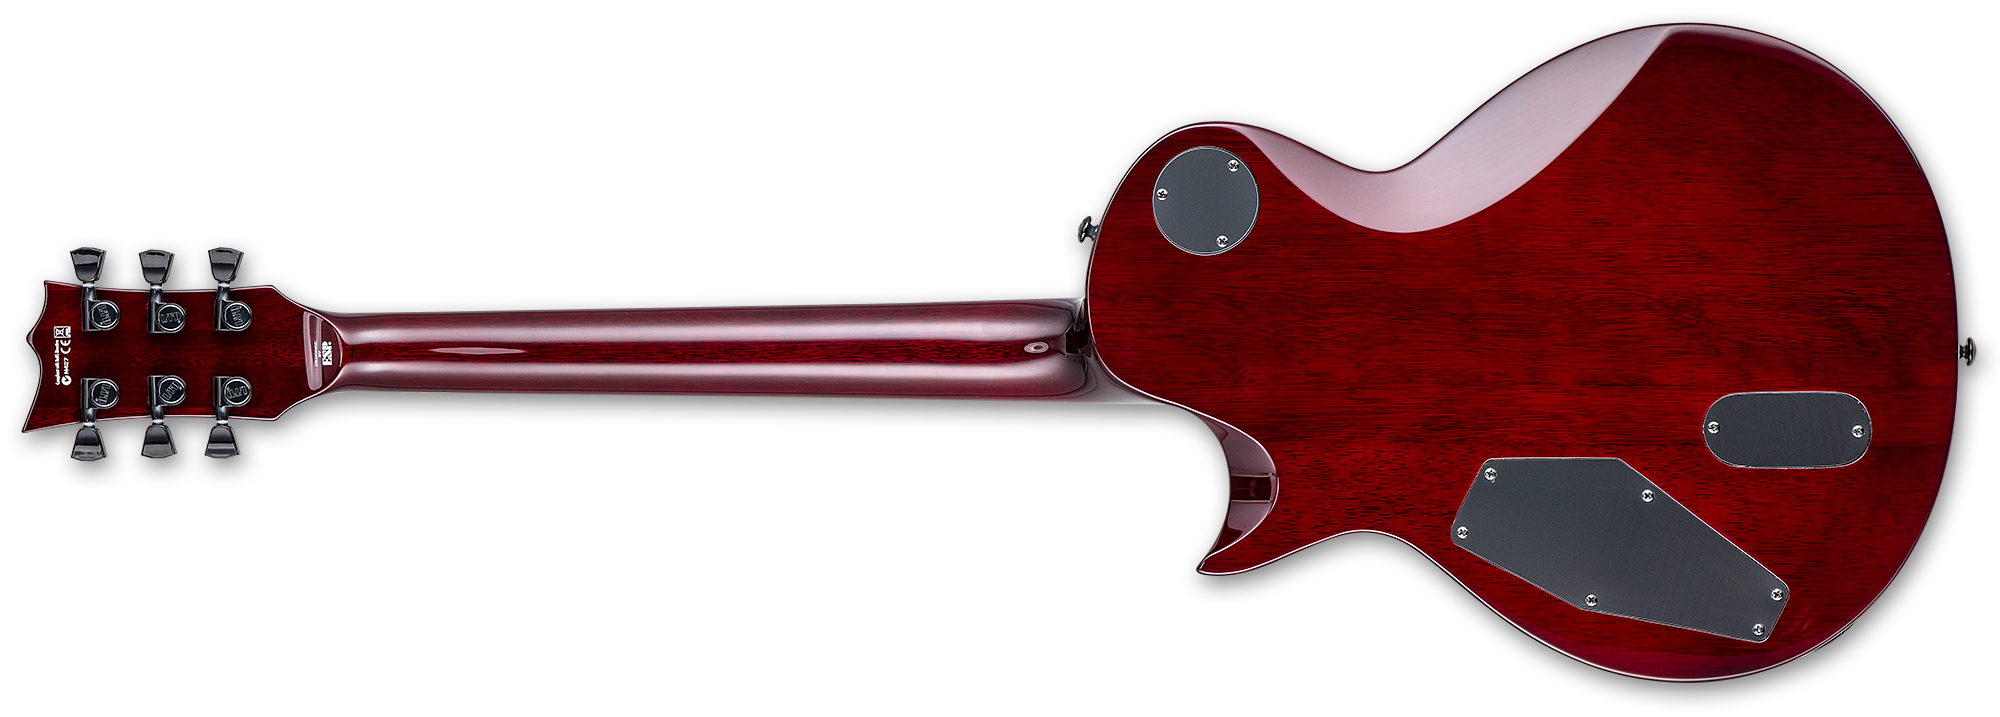 Red Neck Guitar Free PNG